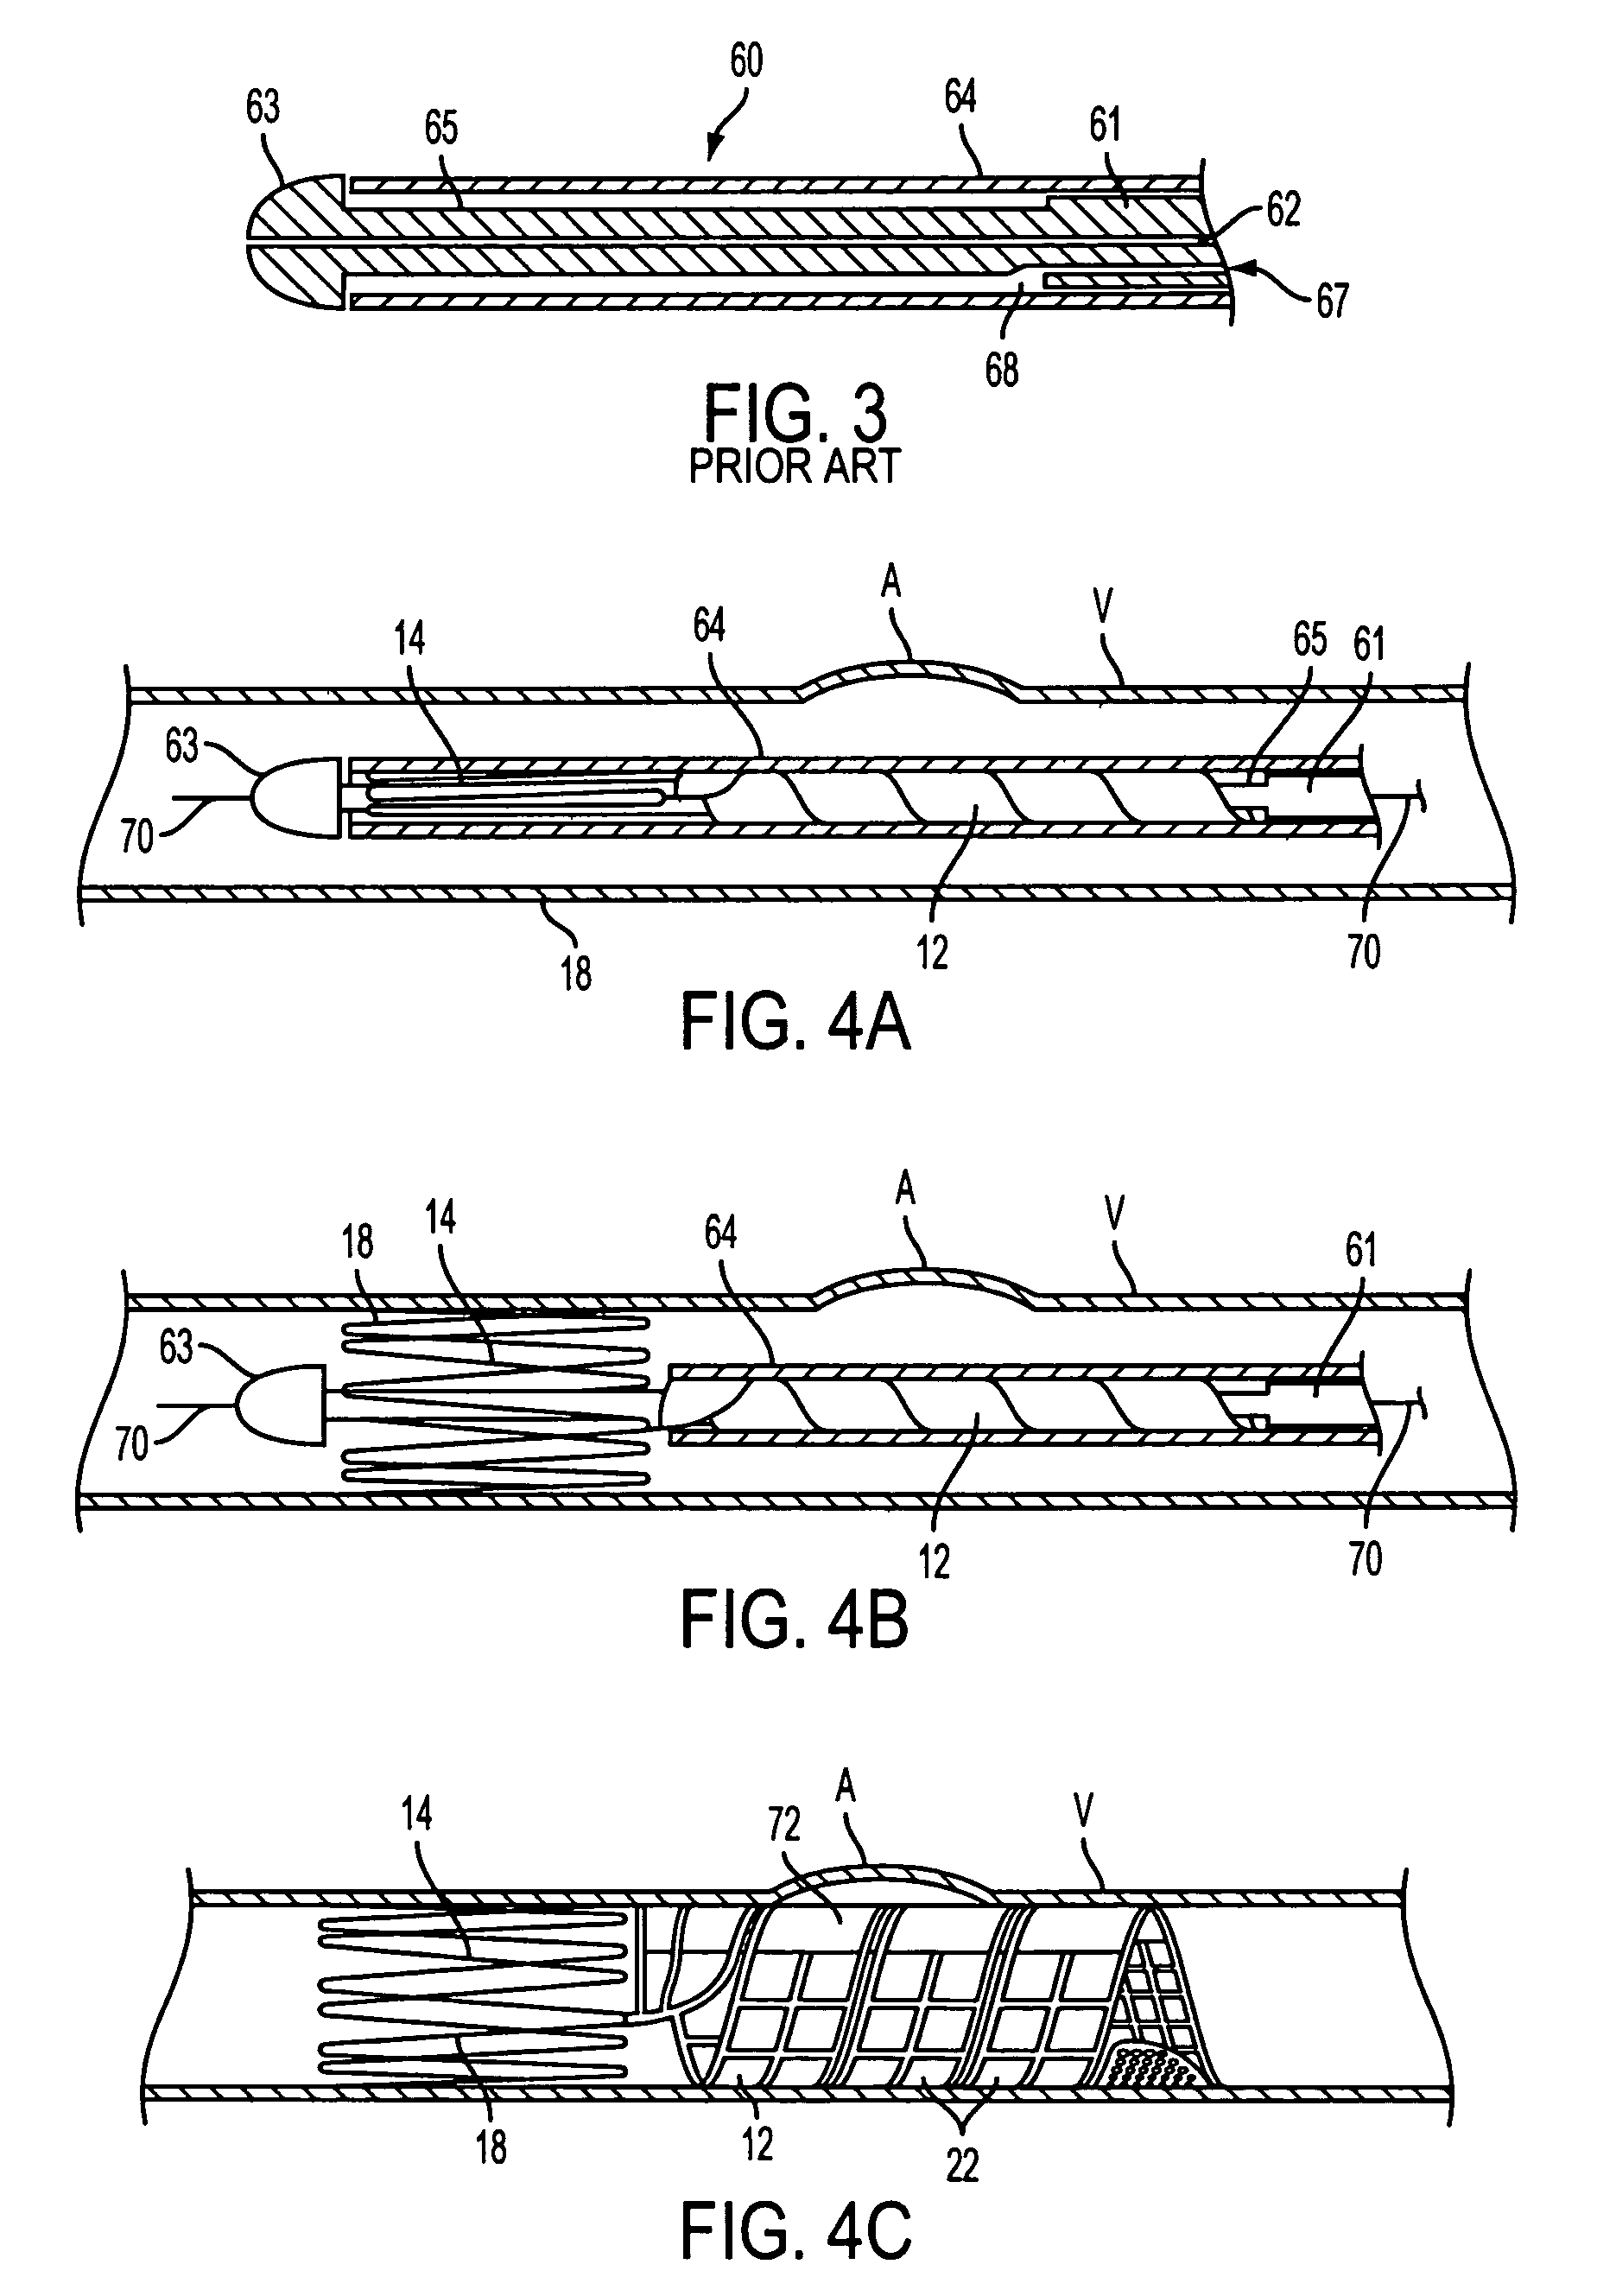 Delivery catheter for ribbon-type prosthesis and methods of use